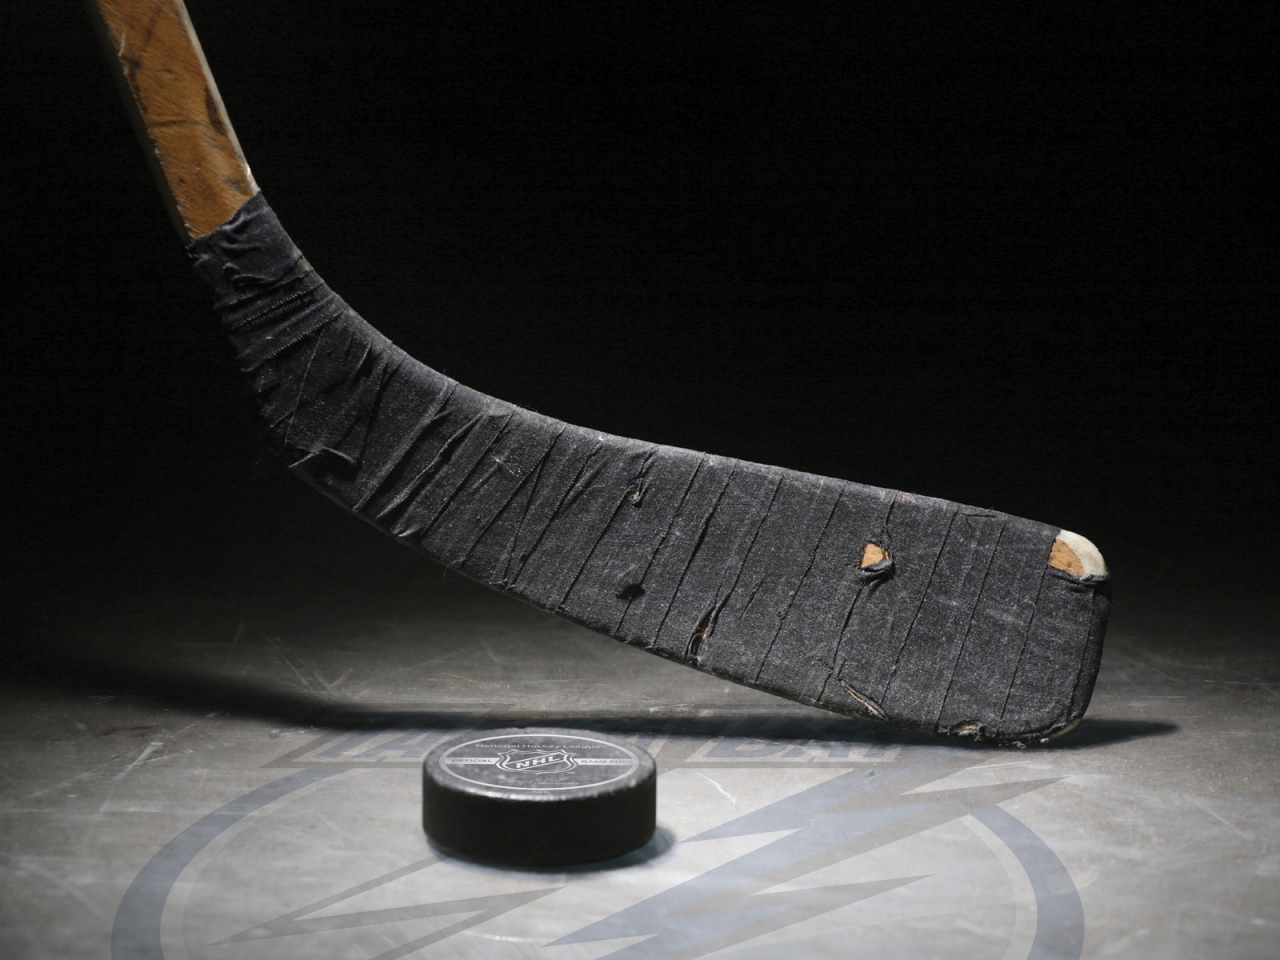 Hockey Puck for 1280 x 960 resolution